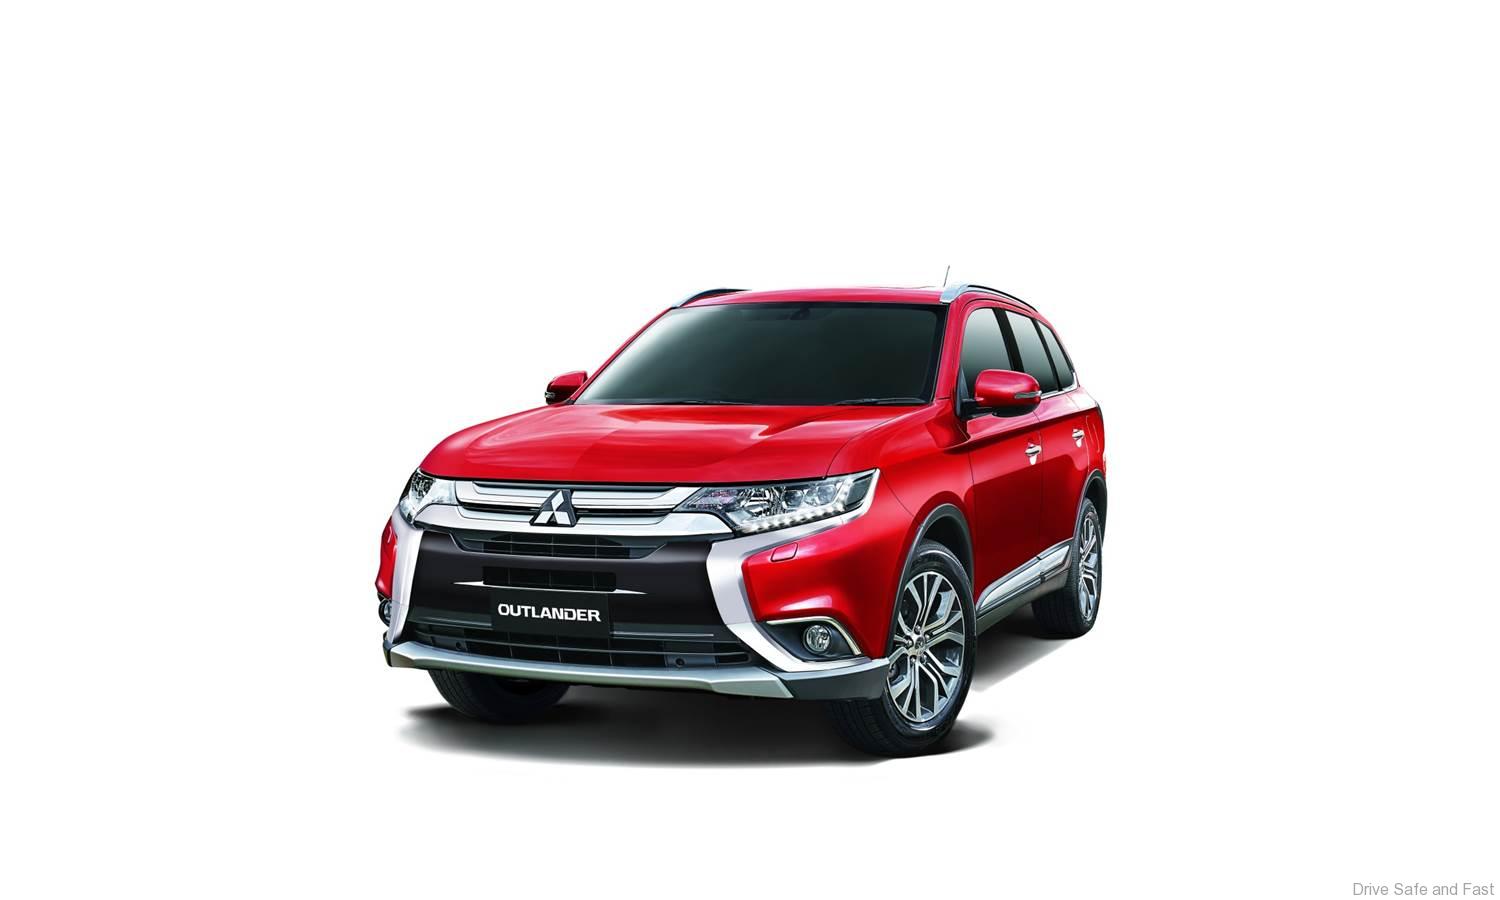 all-new-outlander-bonus-up-to-rm4-000-and-2-years-free-maintenance